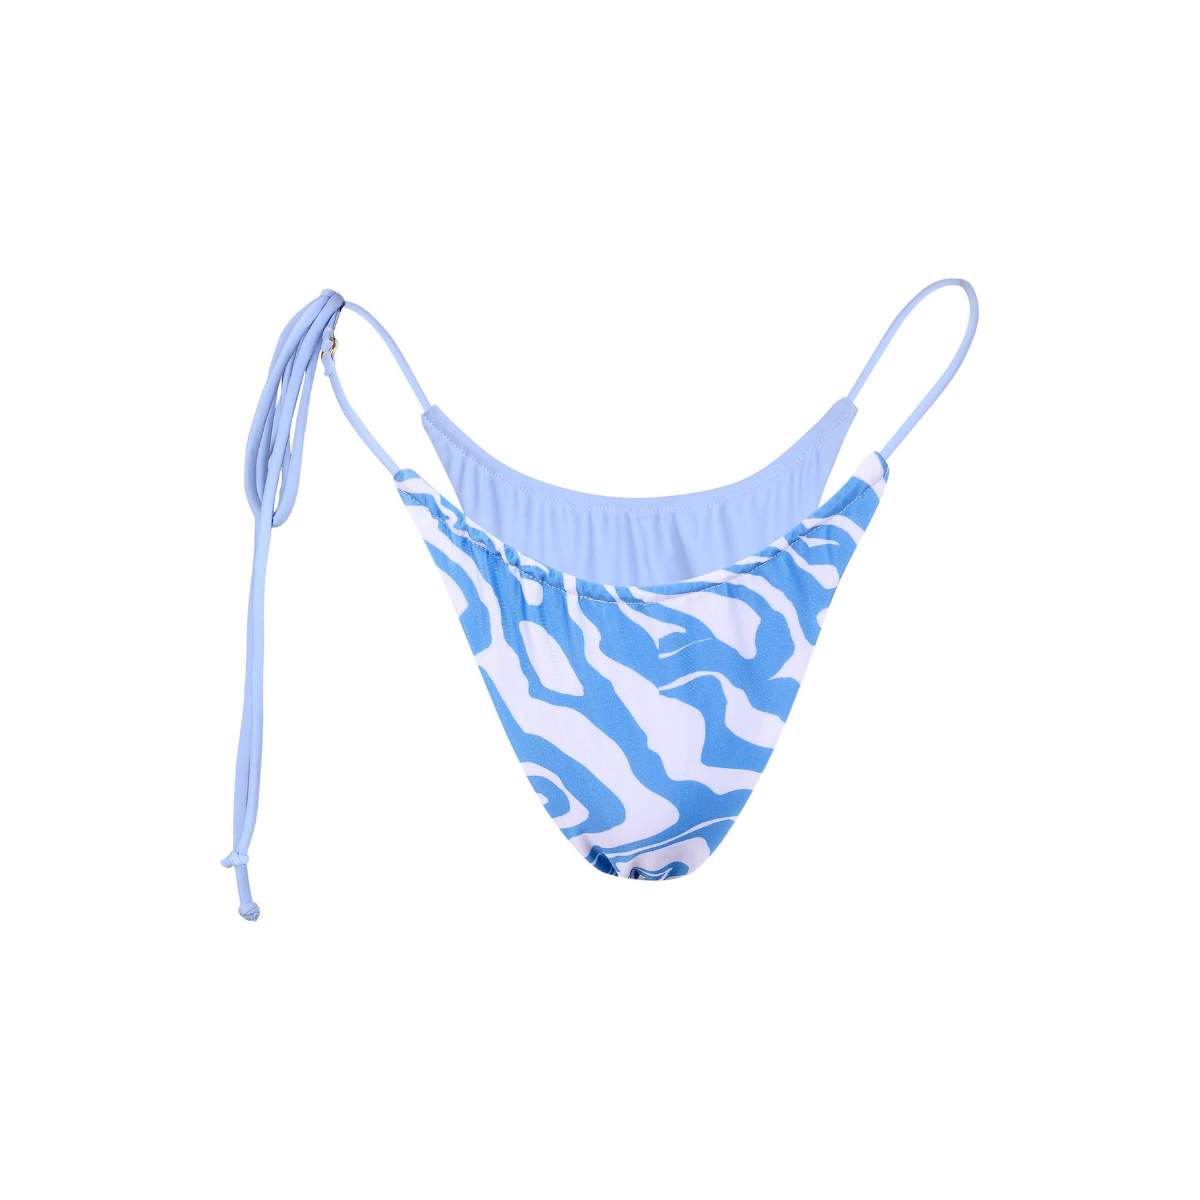 Xena Triangle Bikini Bottoms - Reversible, Blue/White Pattern, Minimal Coverage, One-Side Tie Bottoms, by TIALS, Made in Bali